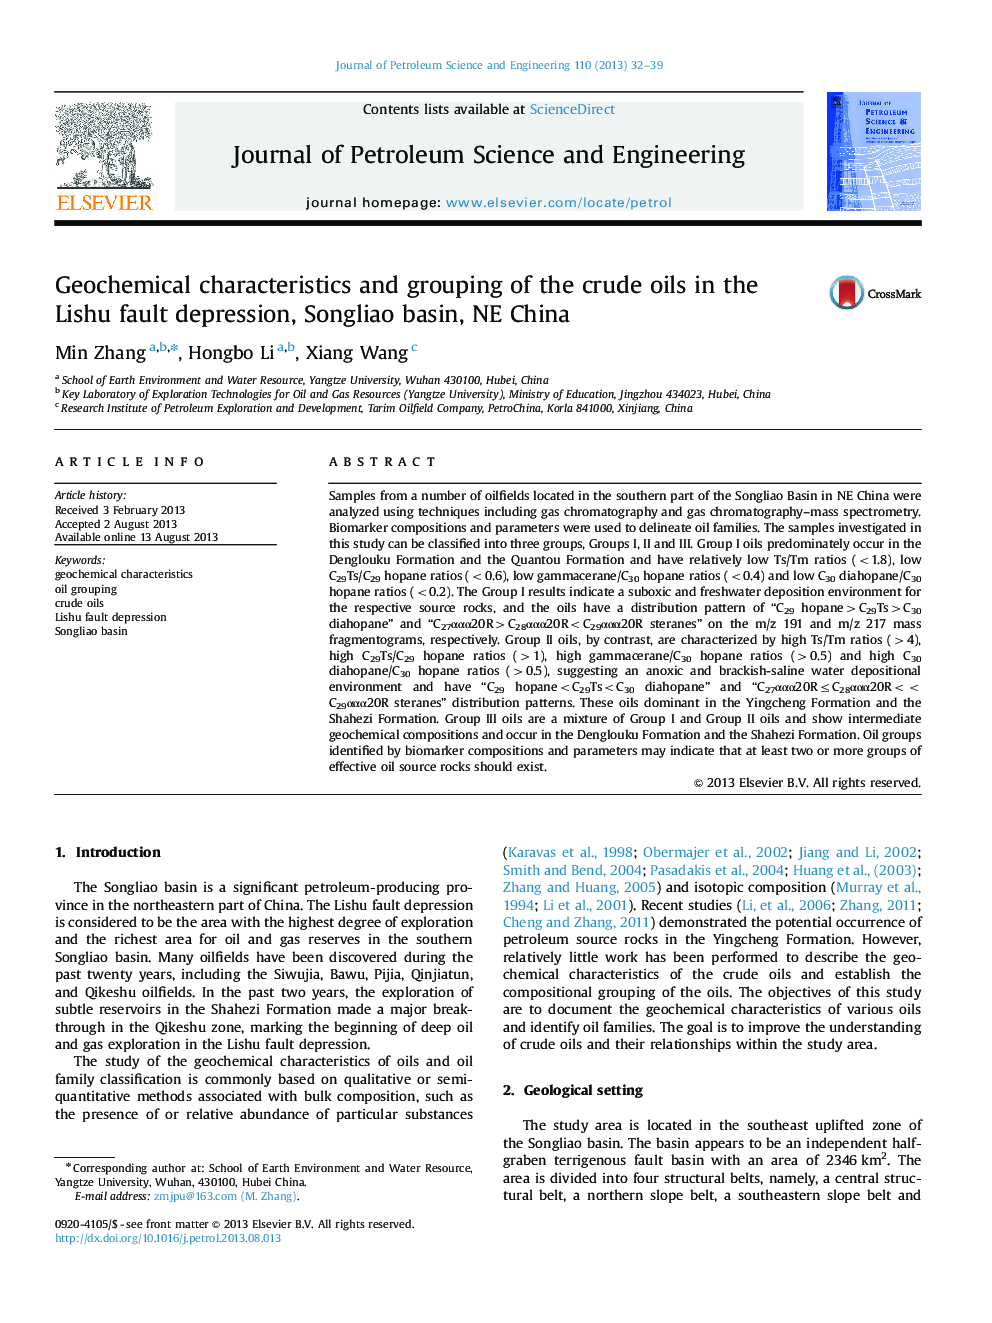 Geochemical characteristics and grouping of the crude oils in the Lishu fault depression, Songliao basin, NE China